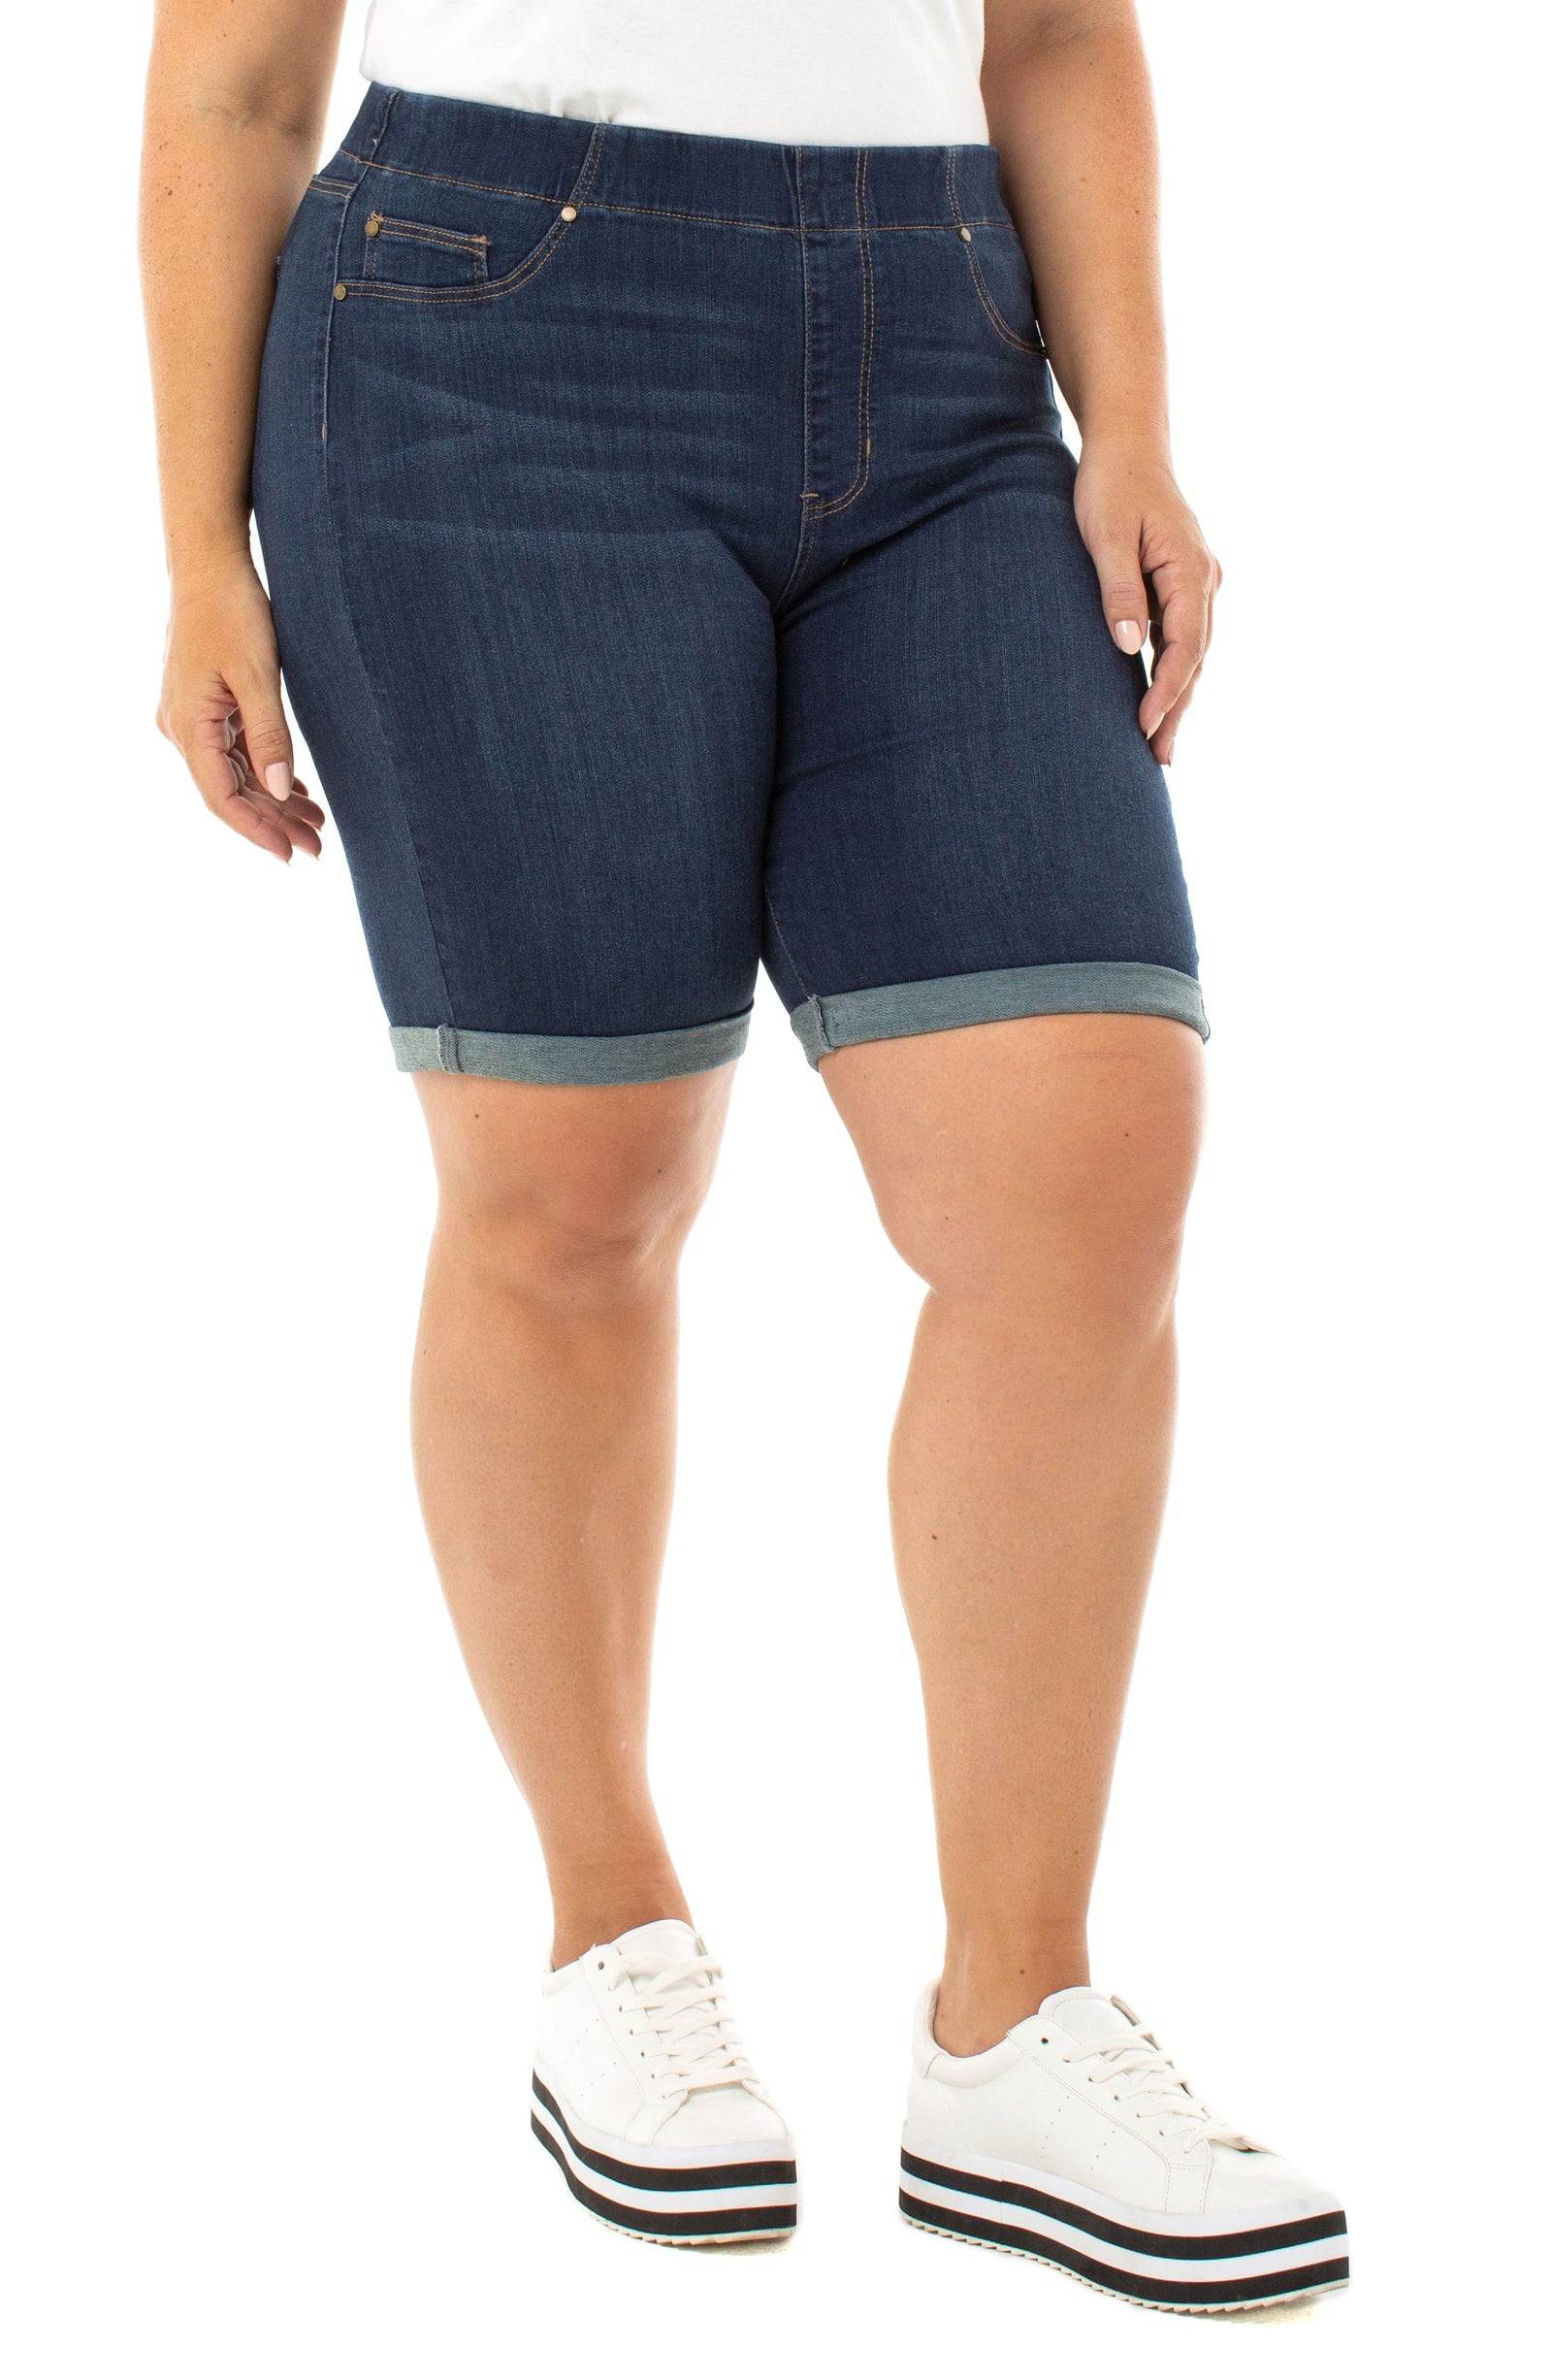 15 Best Plus-Size Shorts For Summer 2021